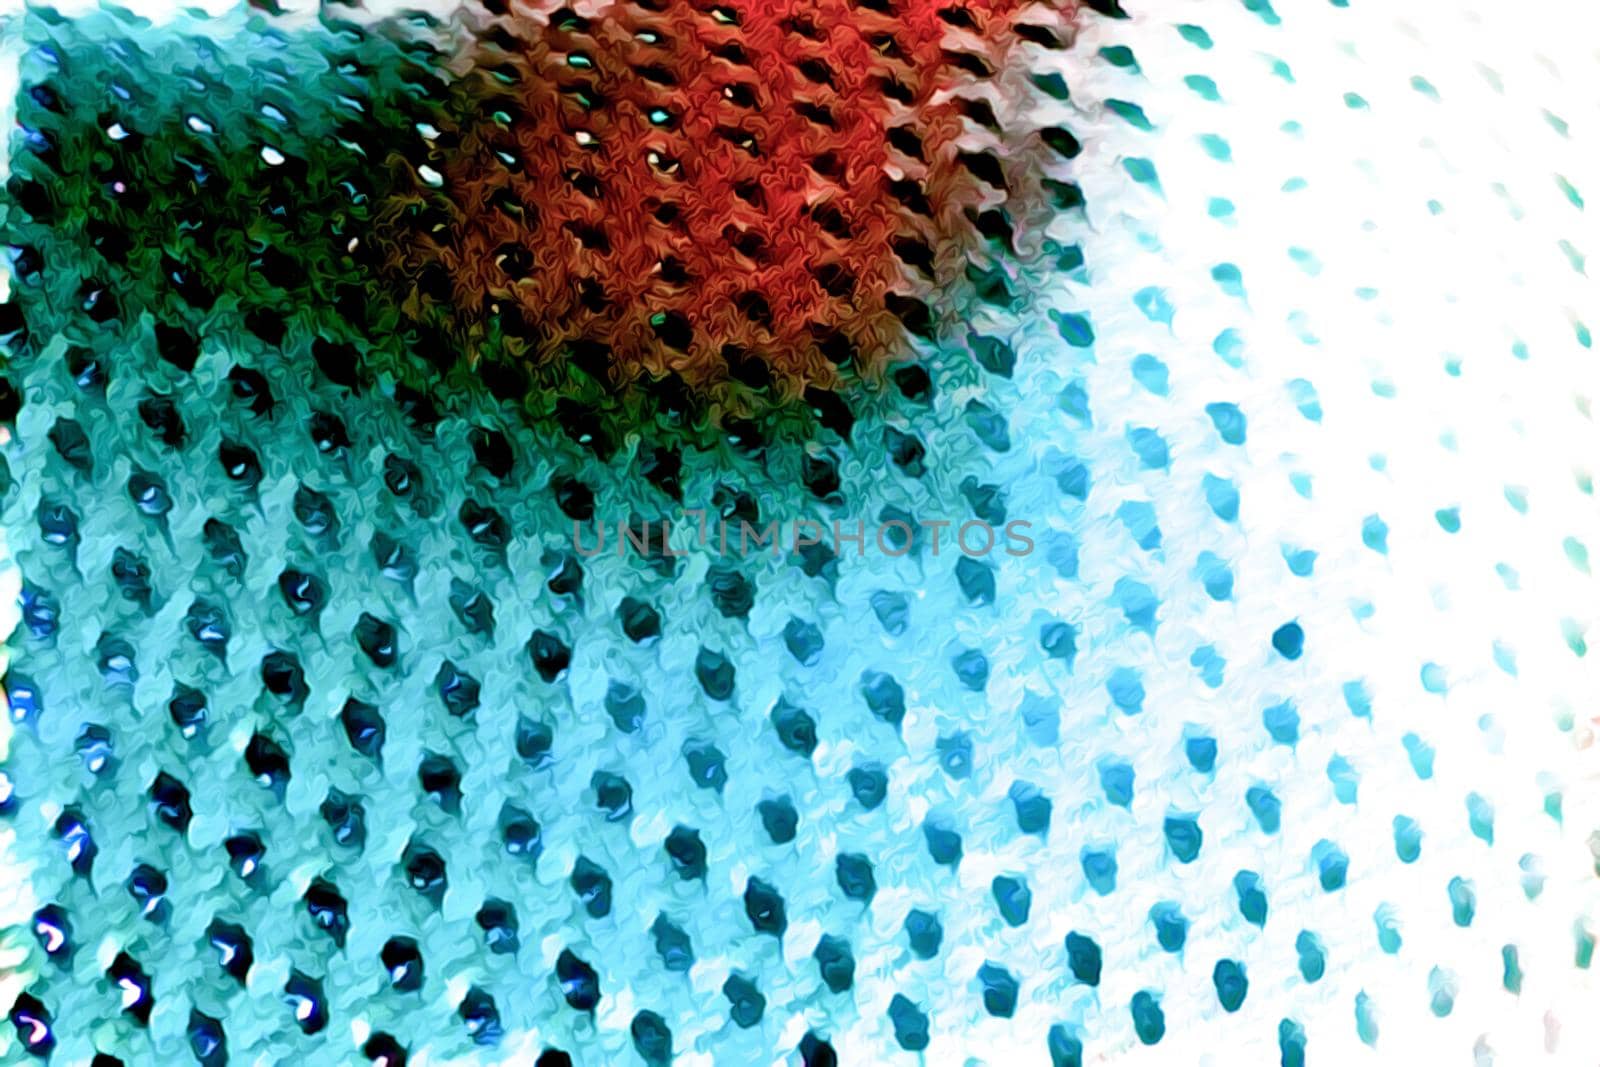 Macro shot of a mesh-like wavy red bright blue surface with holes by silent303